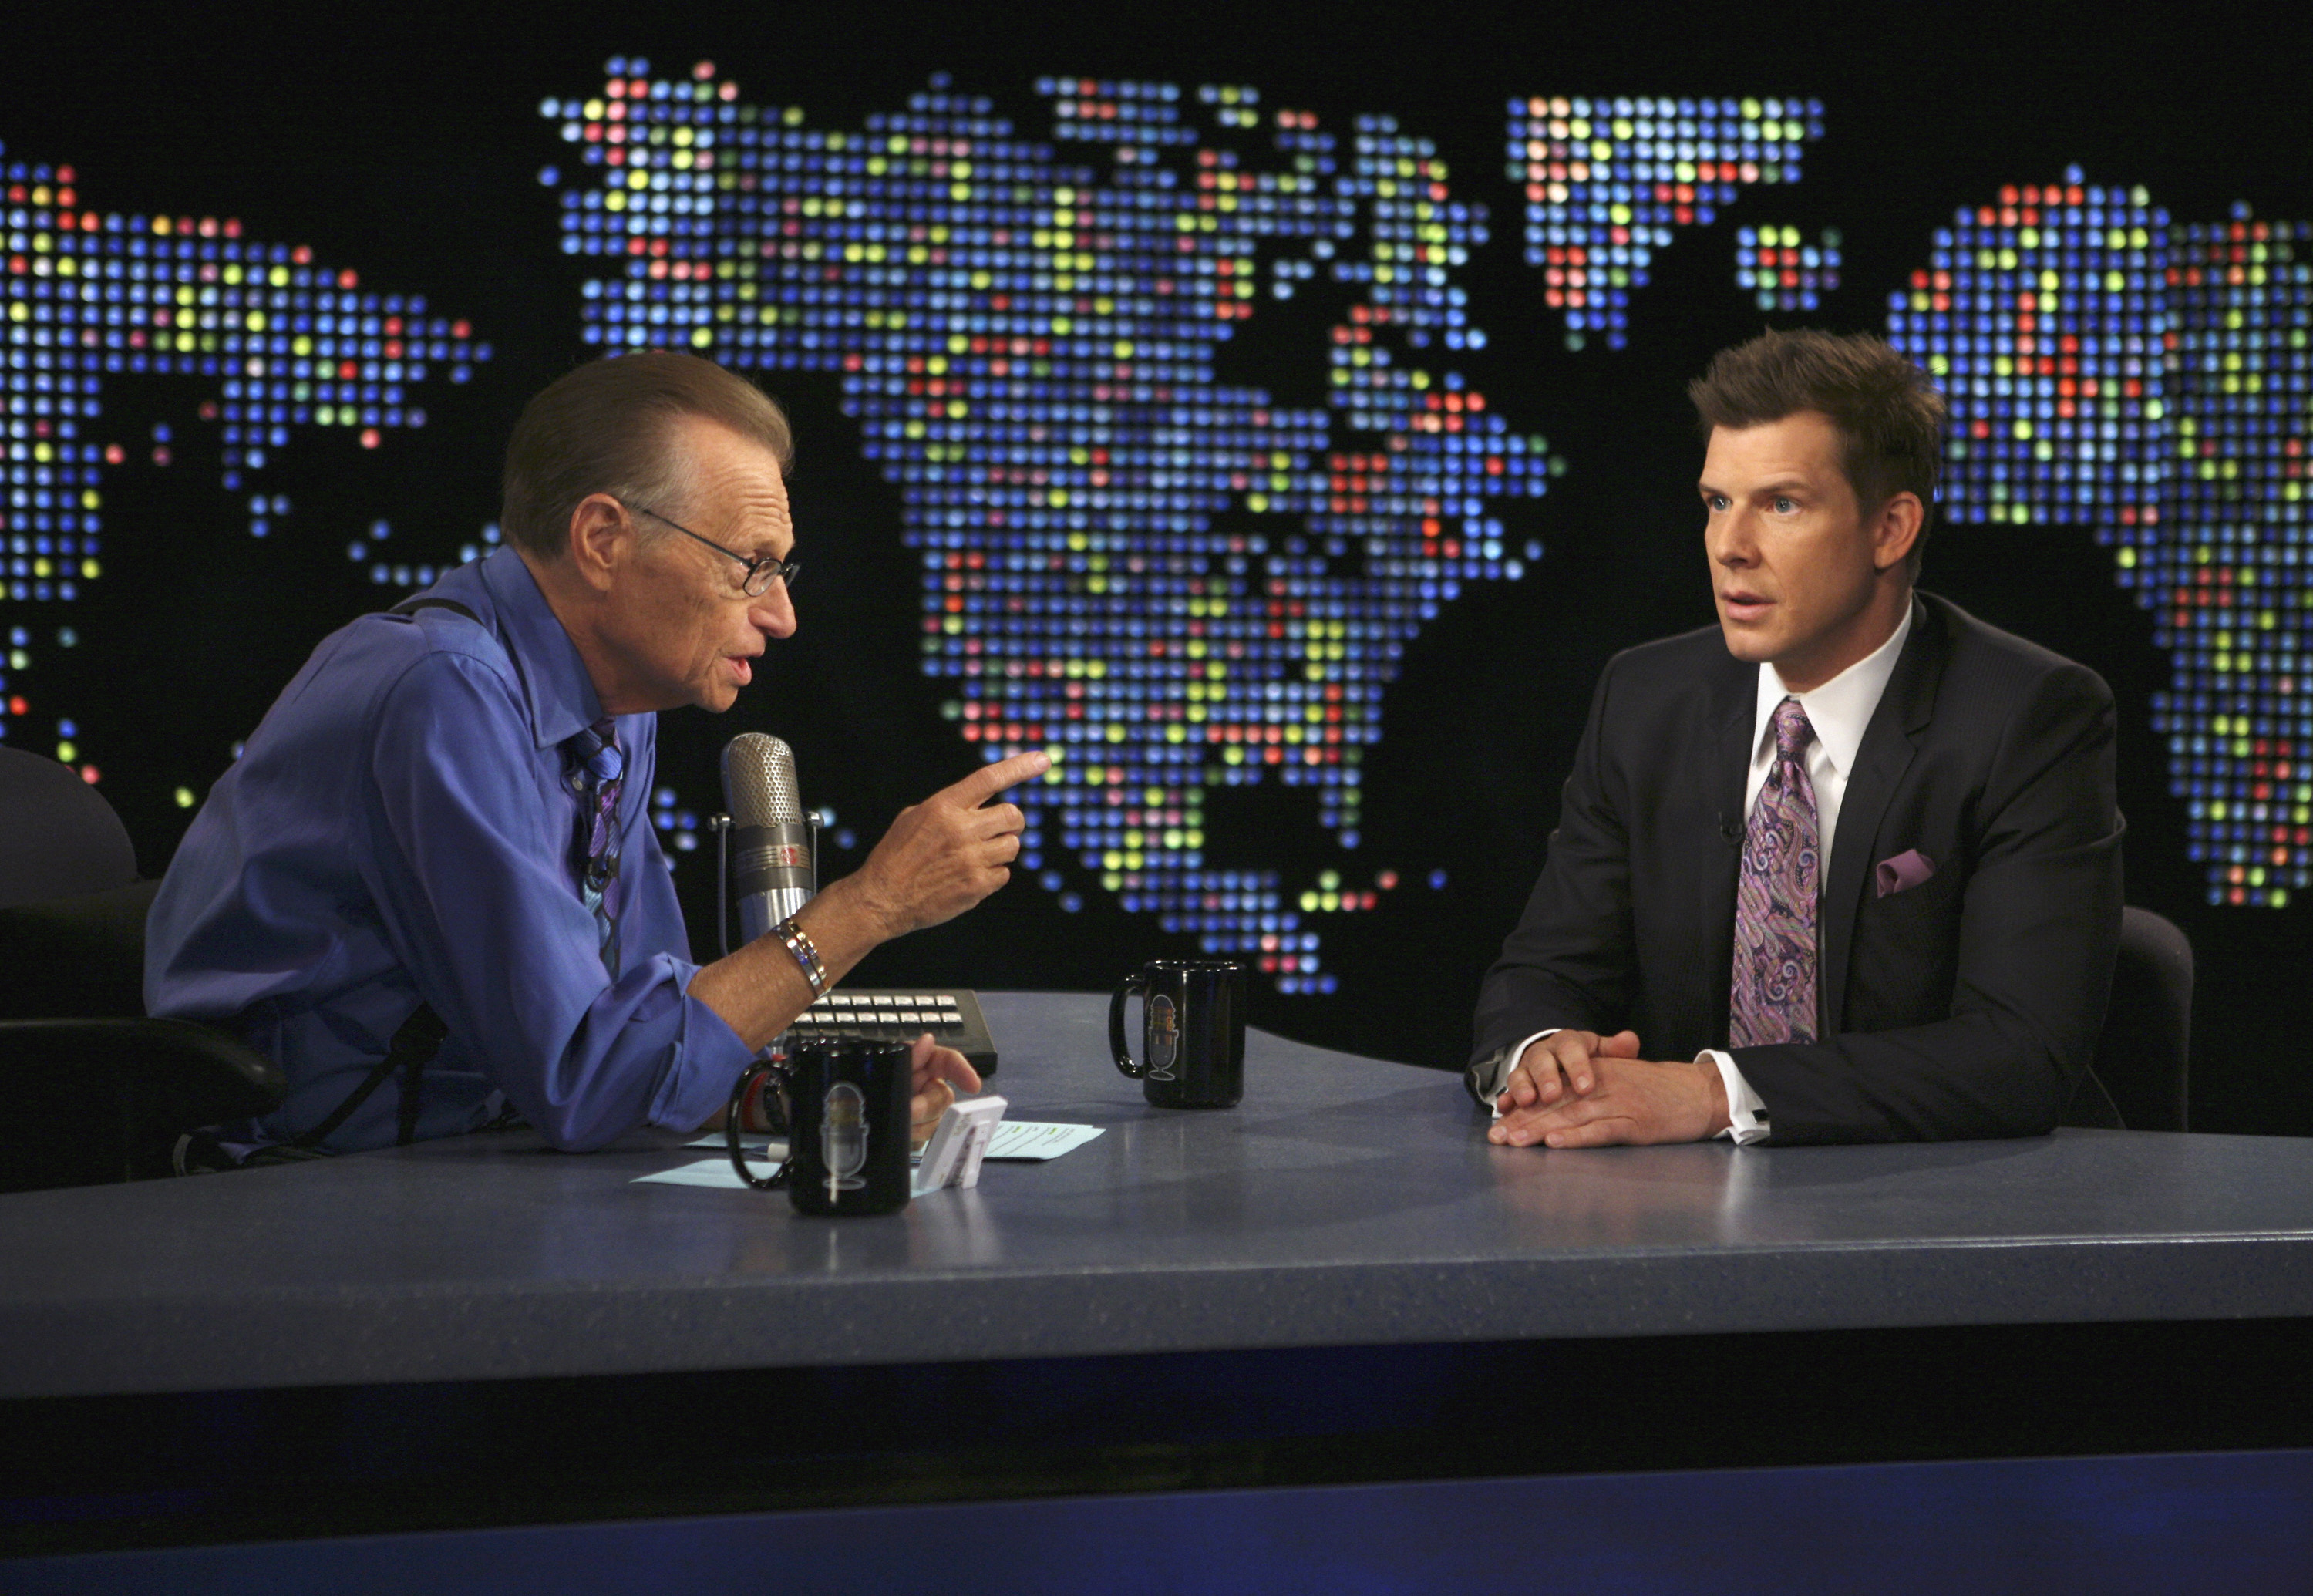 Daniel being interviewed by larry king